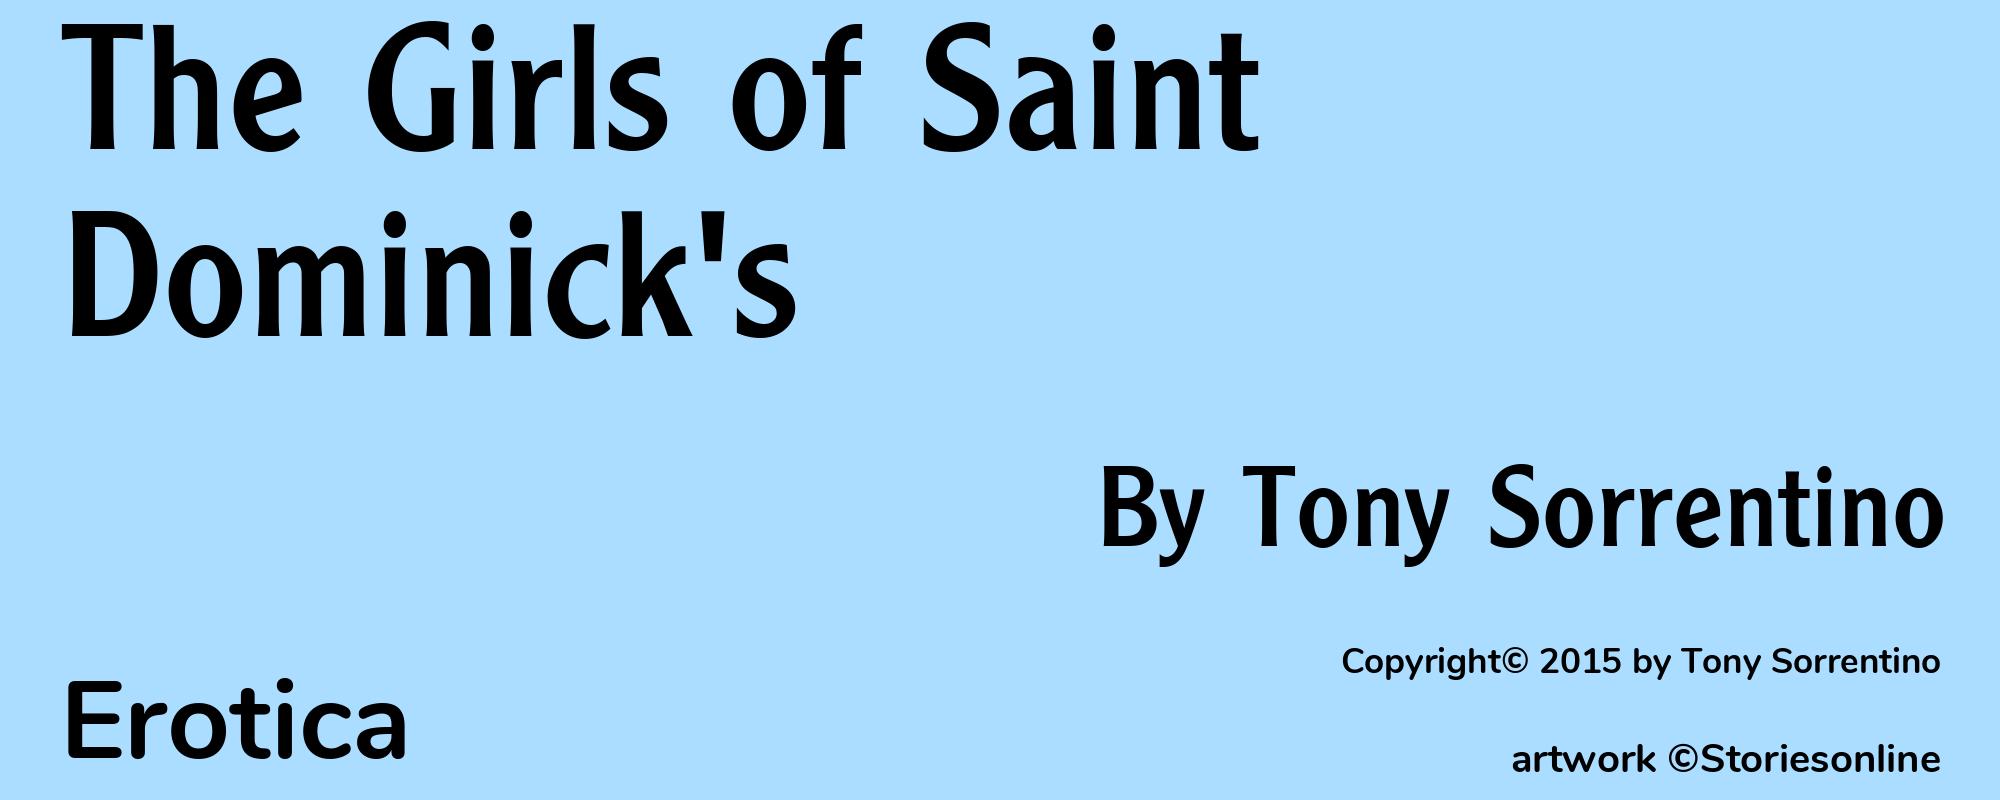 The Girls of Saint Dominick's - Cover